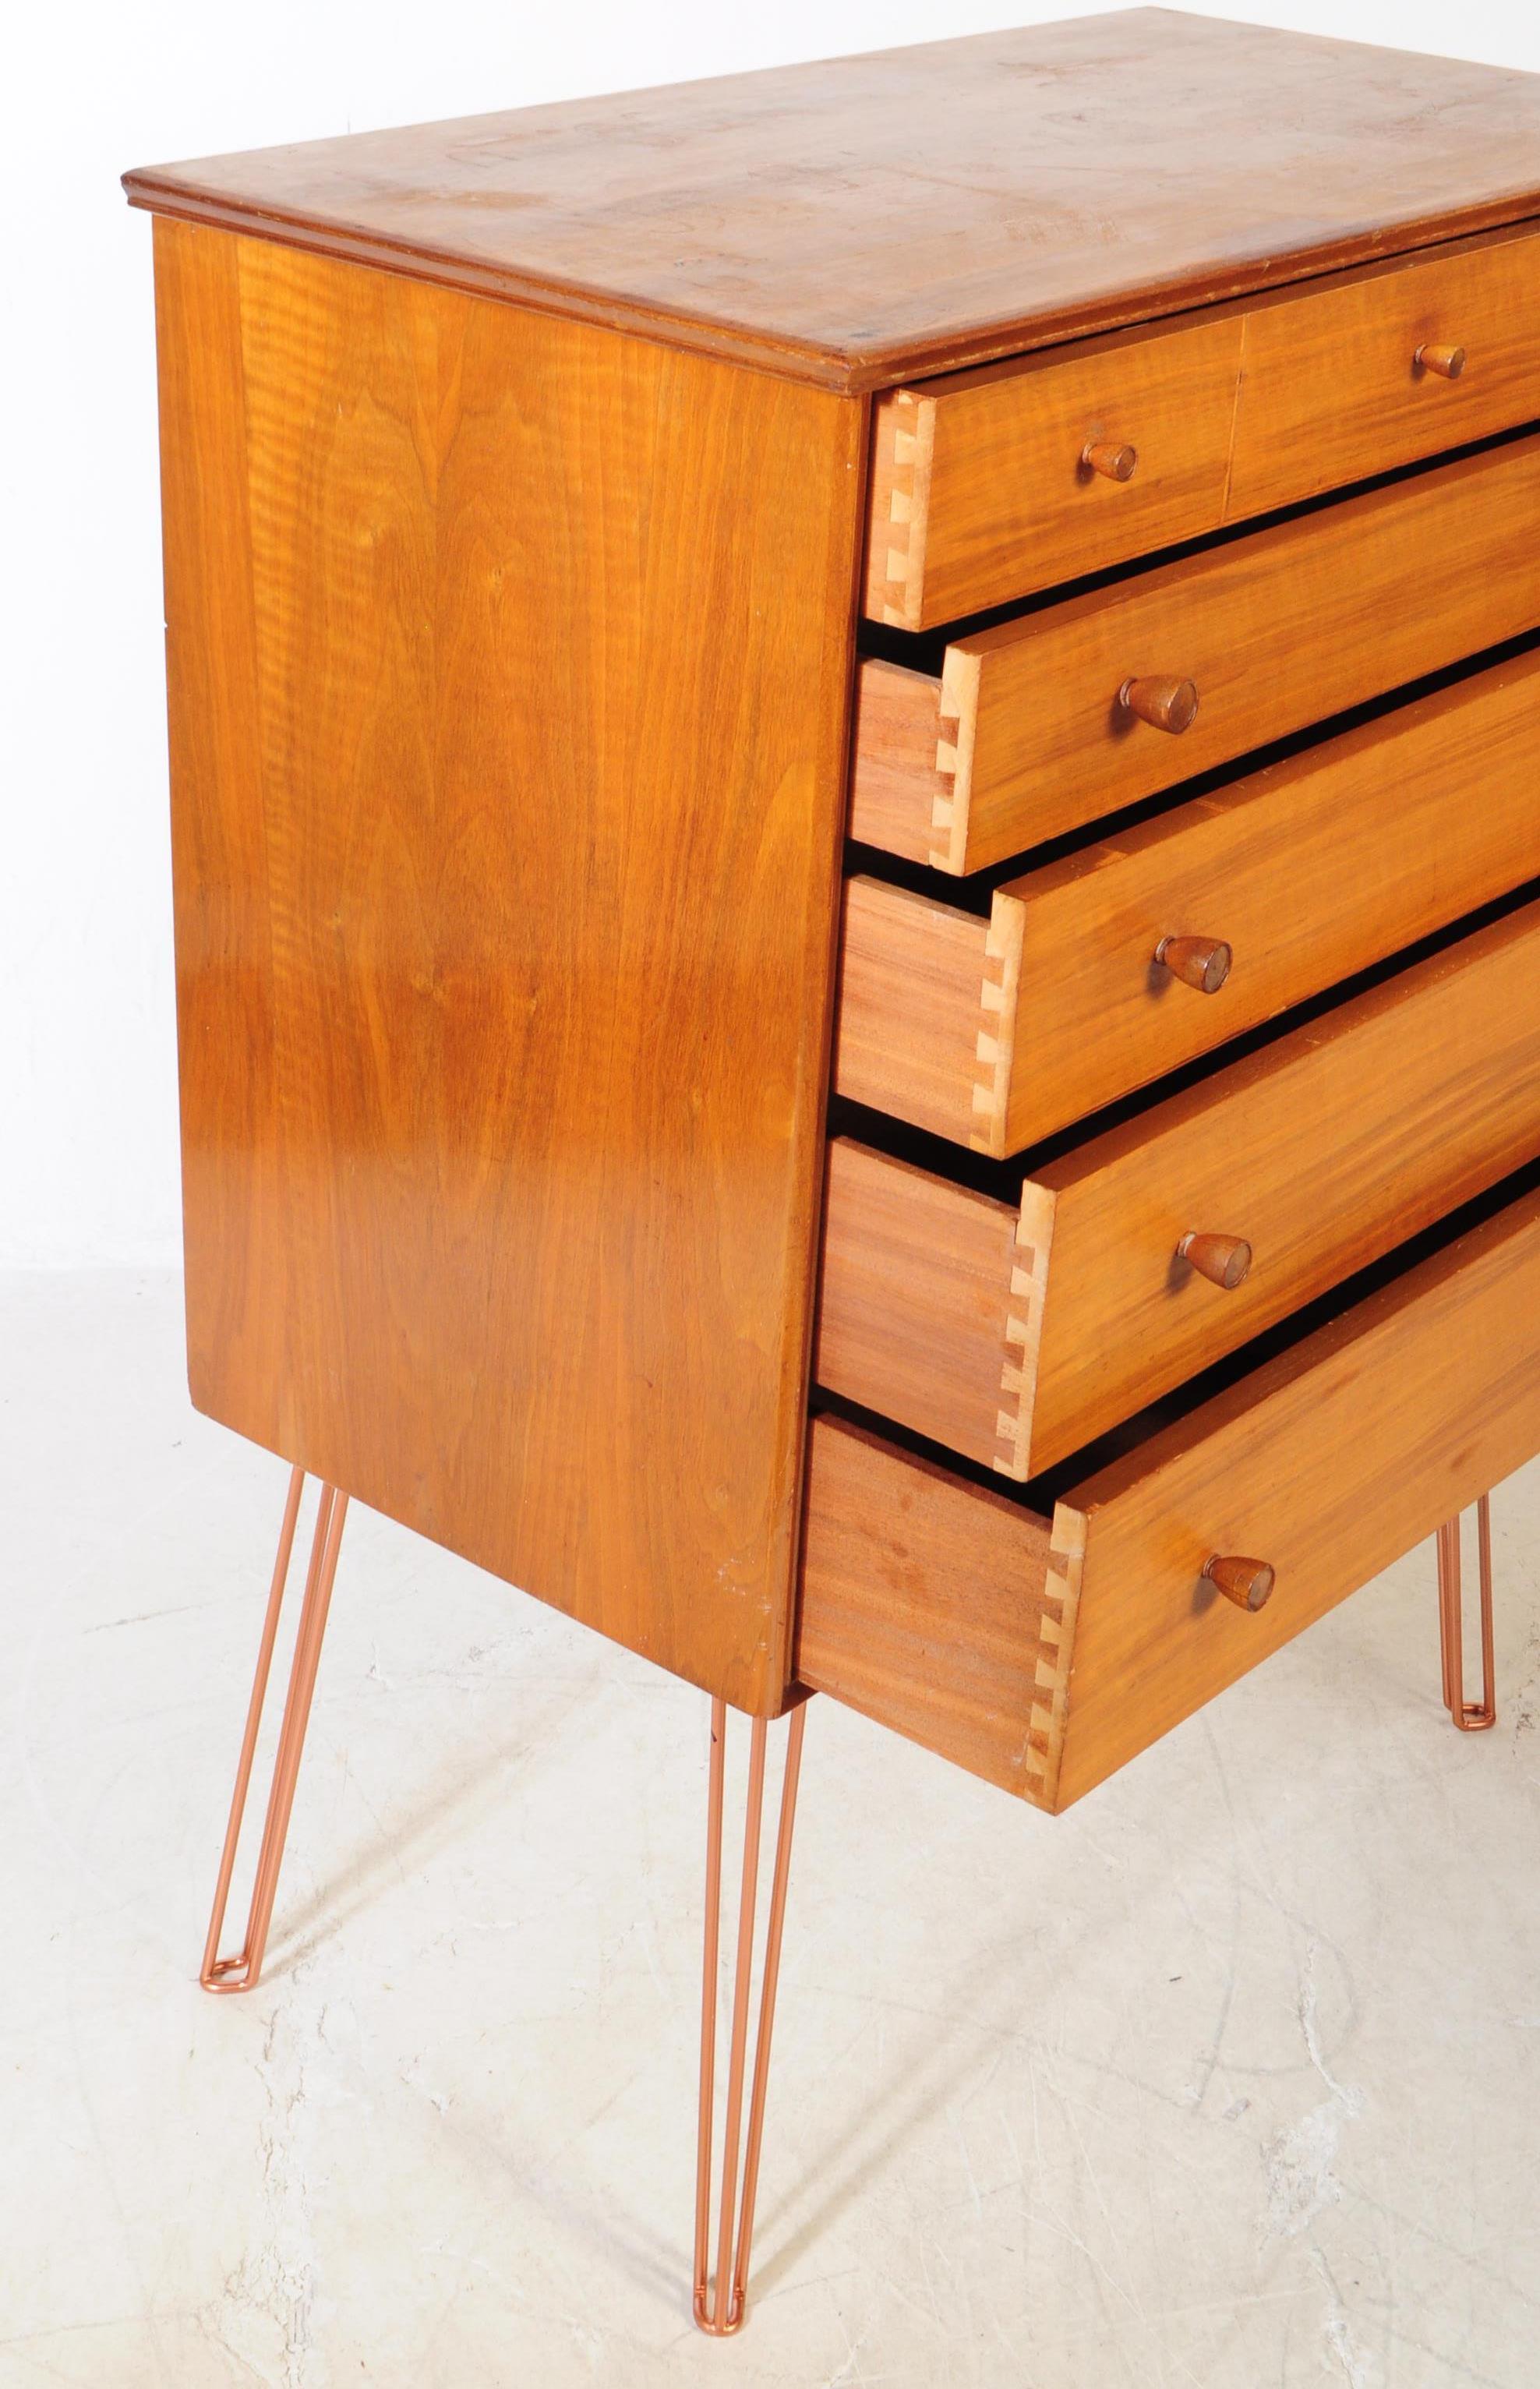 ALFRED COX - VINTAGE MID CENTURY TEAK CHEST OF DRAWERS - Image 4 of 5